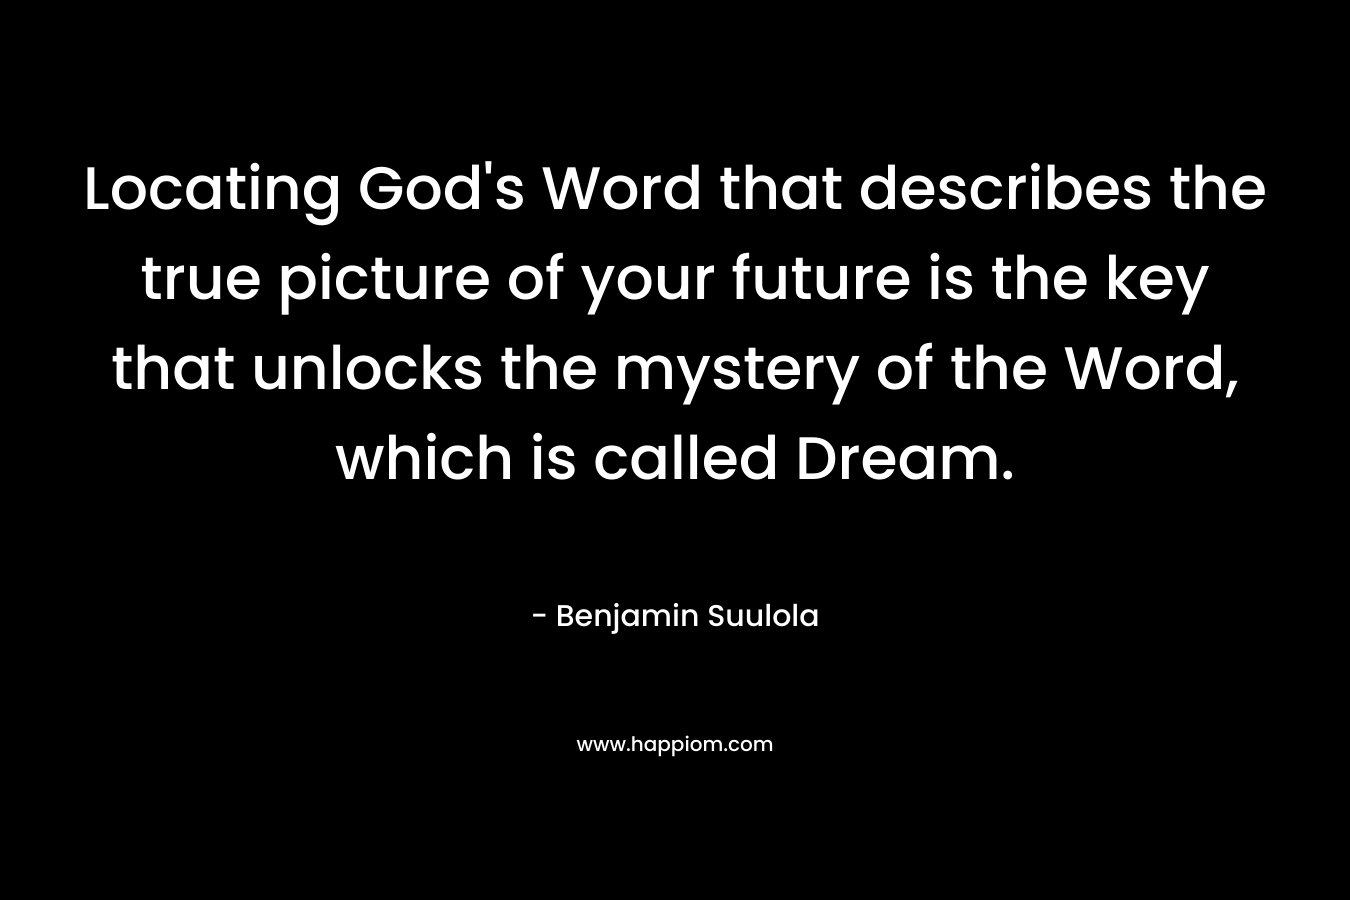 Locating God’s Word that describes the true picture of your future is the key that unlocks the mystery of the Word, which is called Dream. – Benjamin Suulola